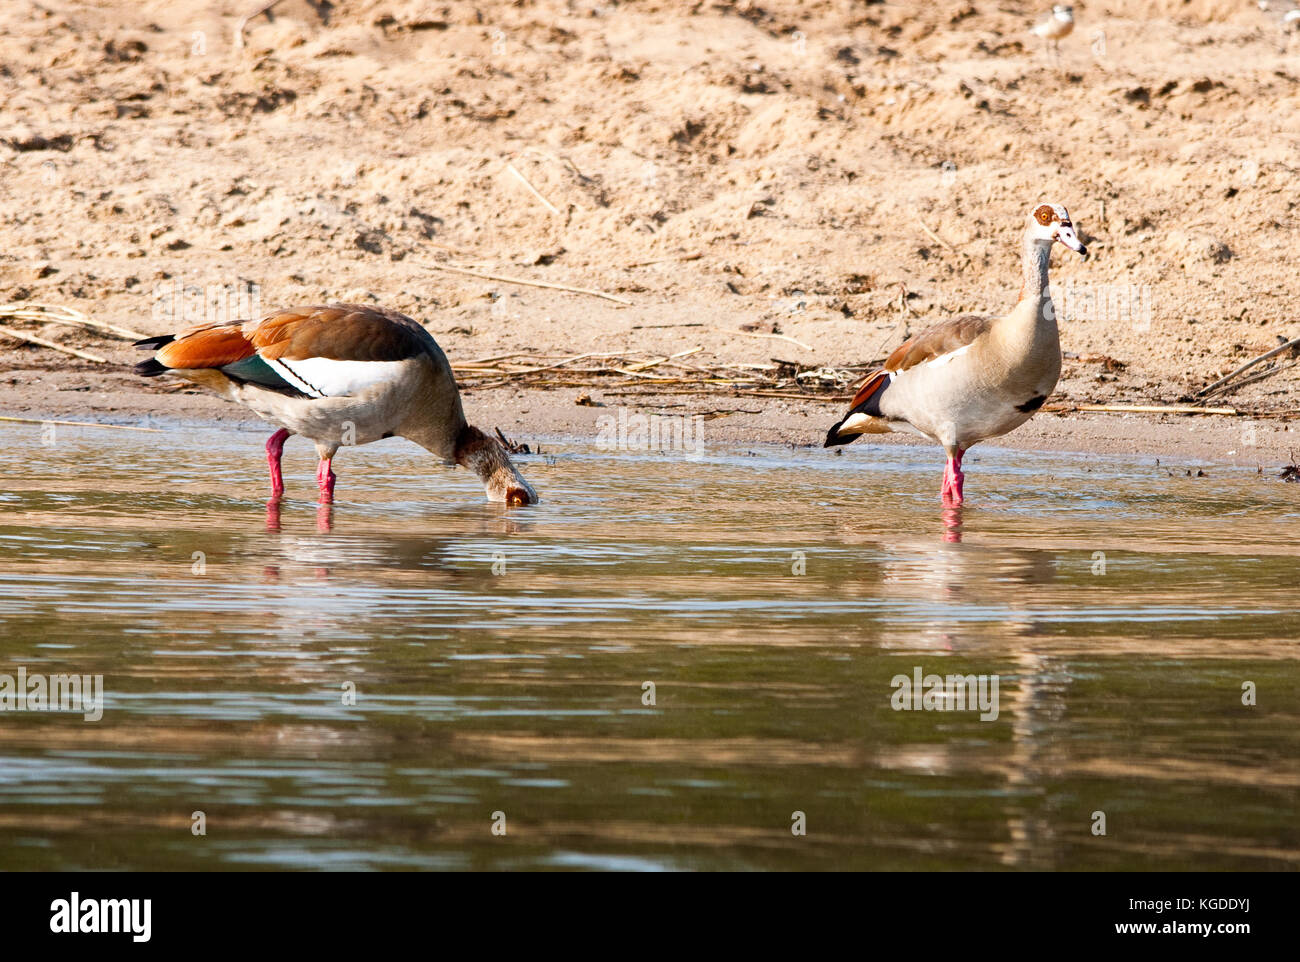 Egyptian geese (Alopochen aegyptiaca) in the St. Lucia estuary, South Africa. Stock Photo